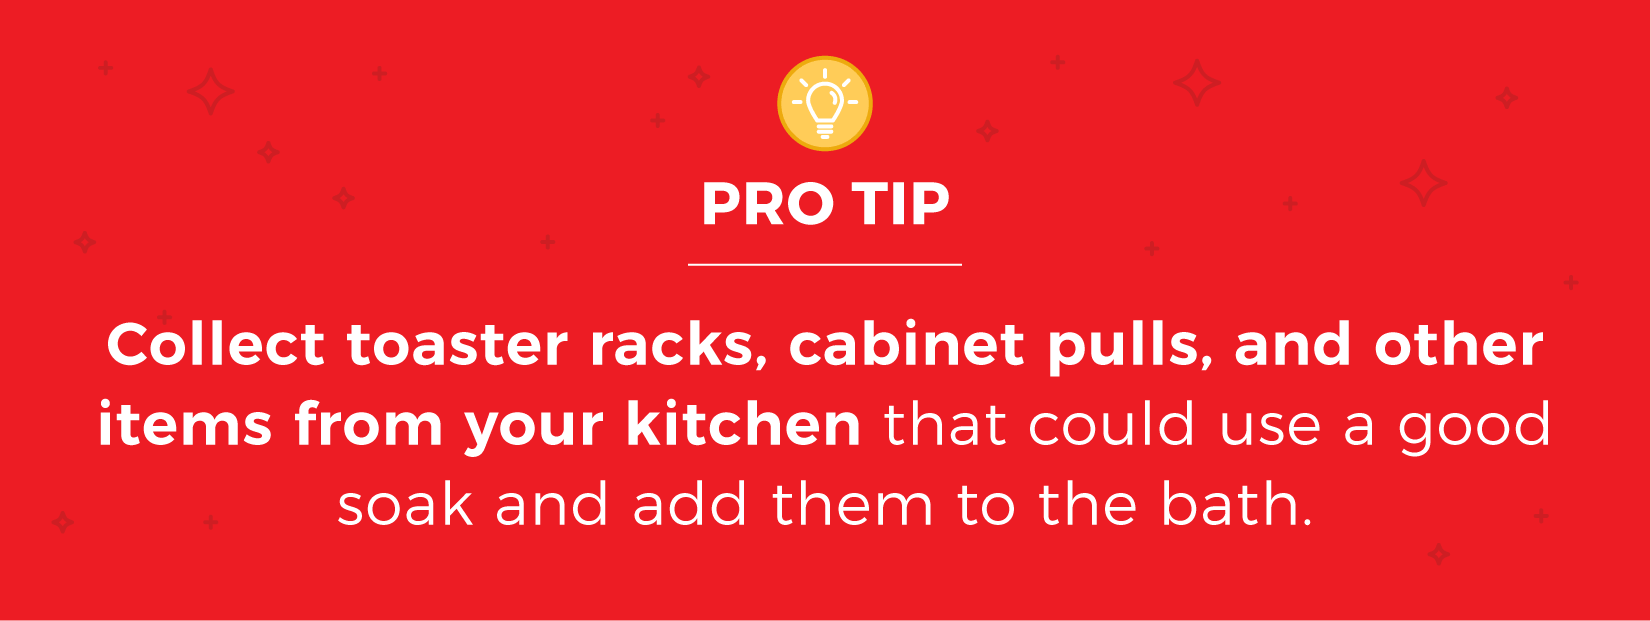 Image text reads: collect toaster racks, cabinet pulls, and other items from your kitchen that could use a good soak and add them to the bath.